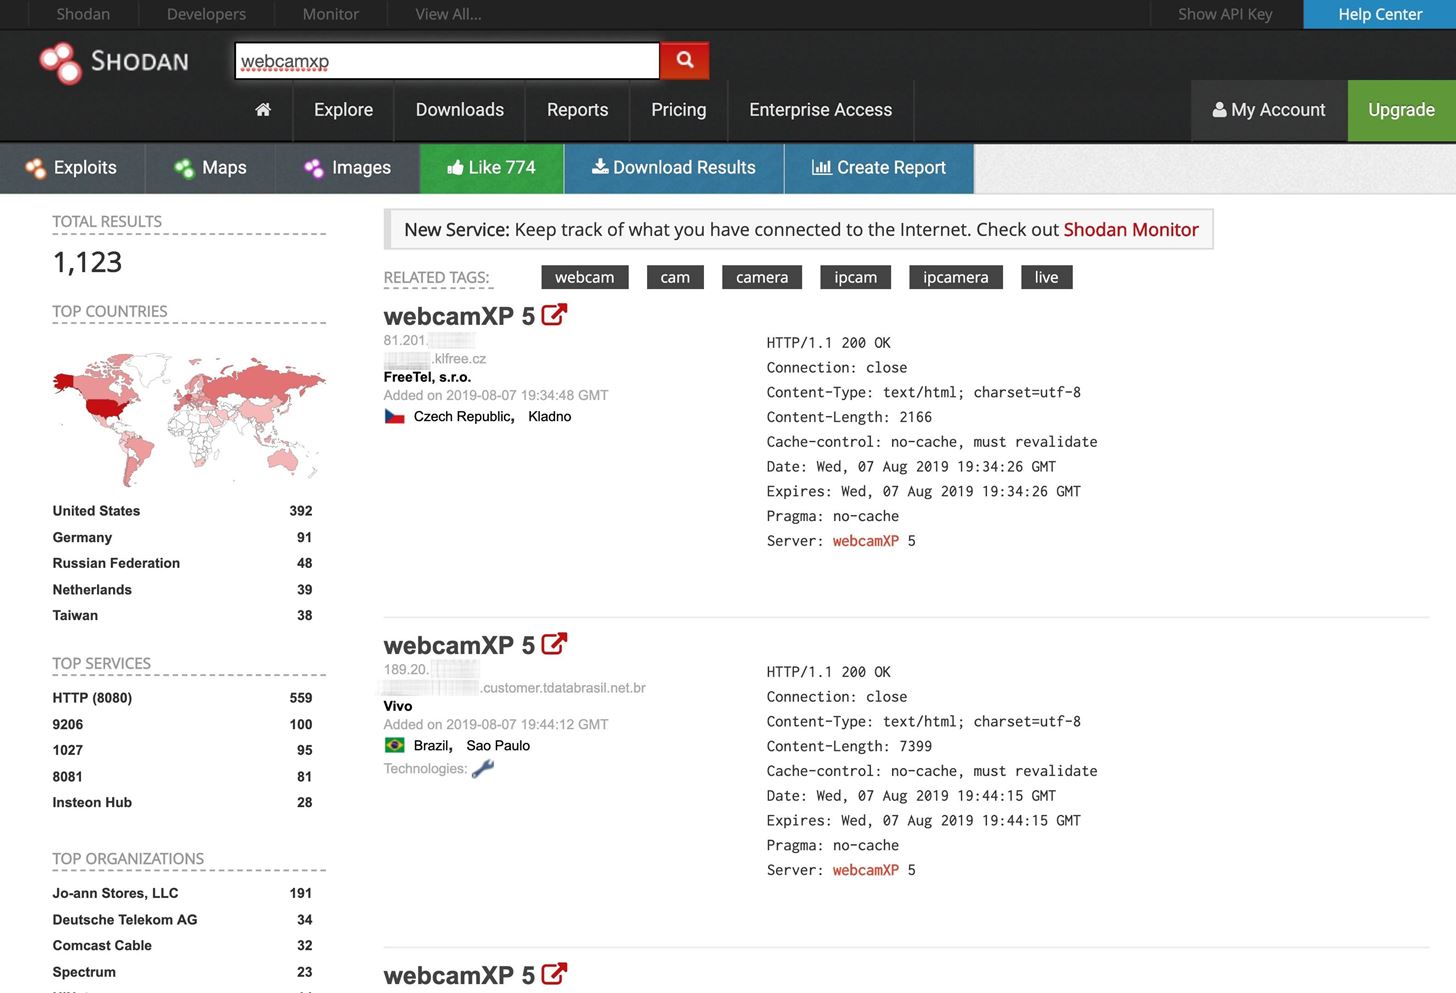 How to Find Vulnerable Webcams Across the Globe Using Shodan